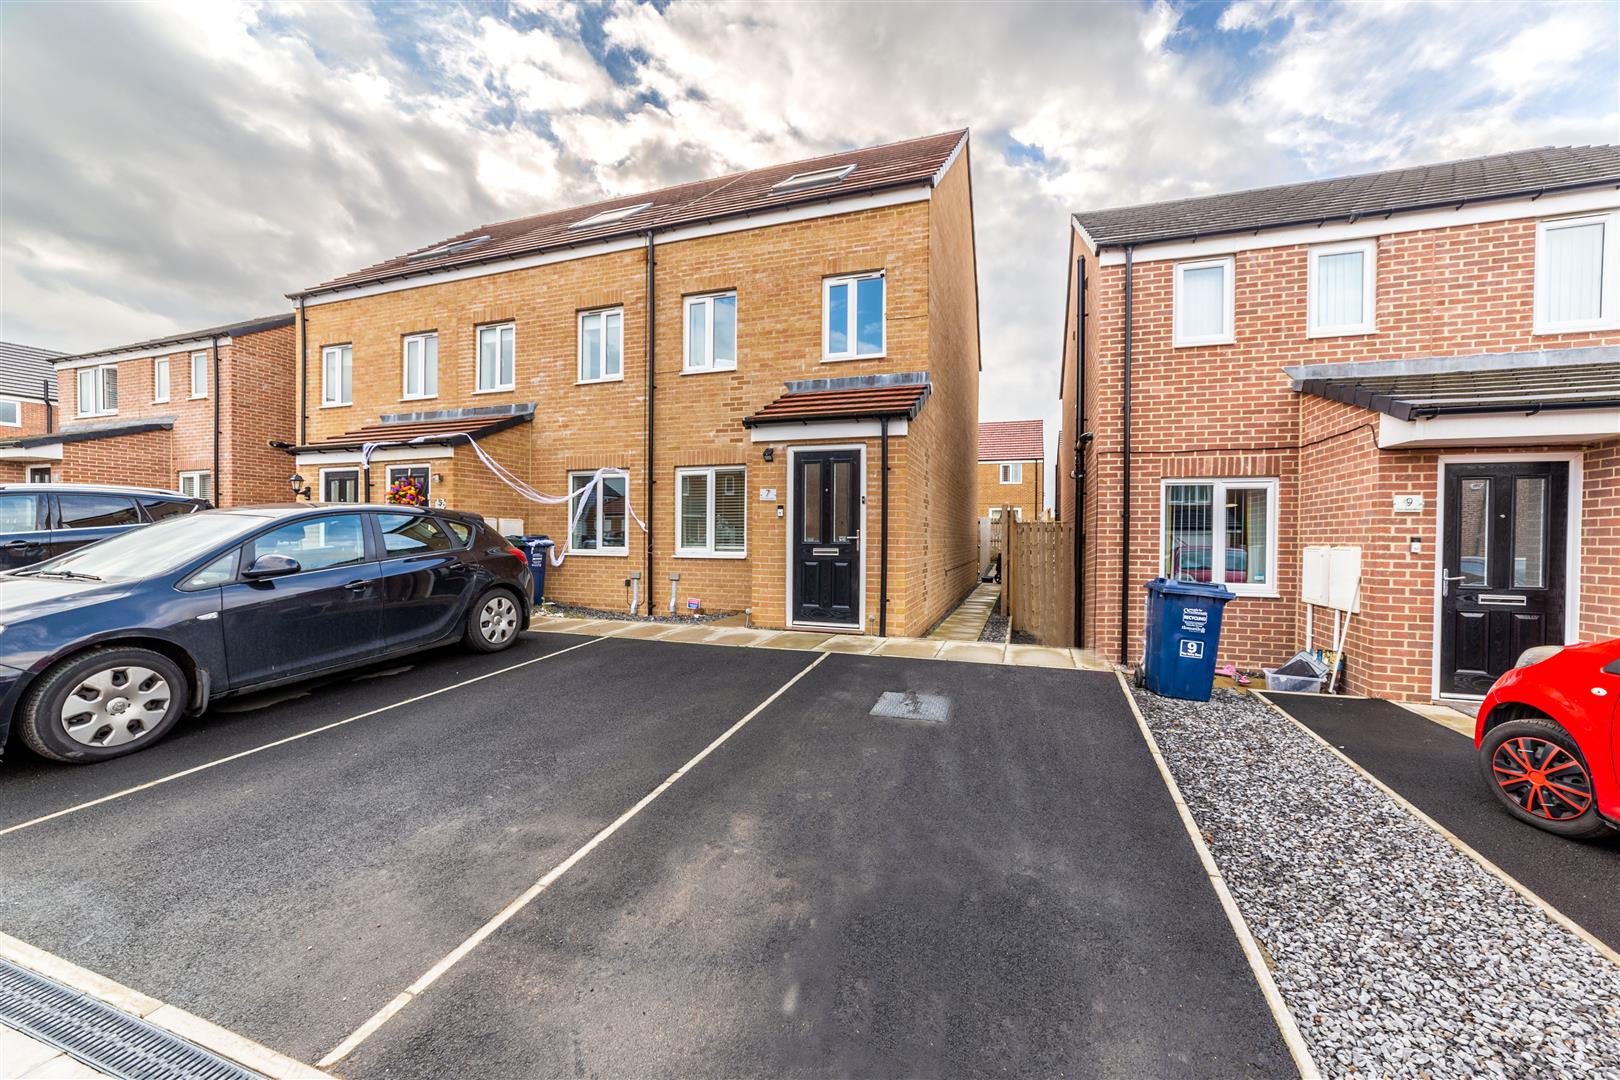 3 bed town house for sale in Pine Valley Mews, Newcastle Upon Tyne - Property Image 1